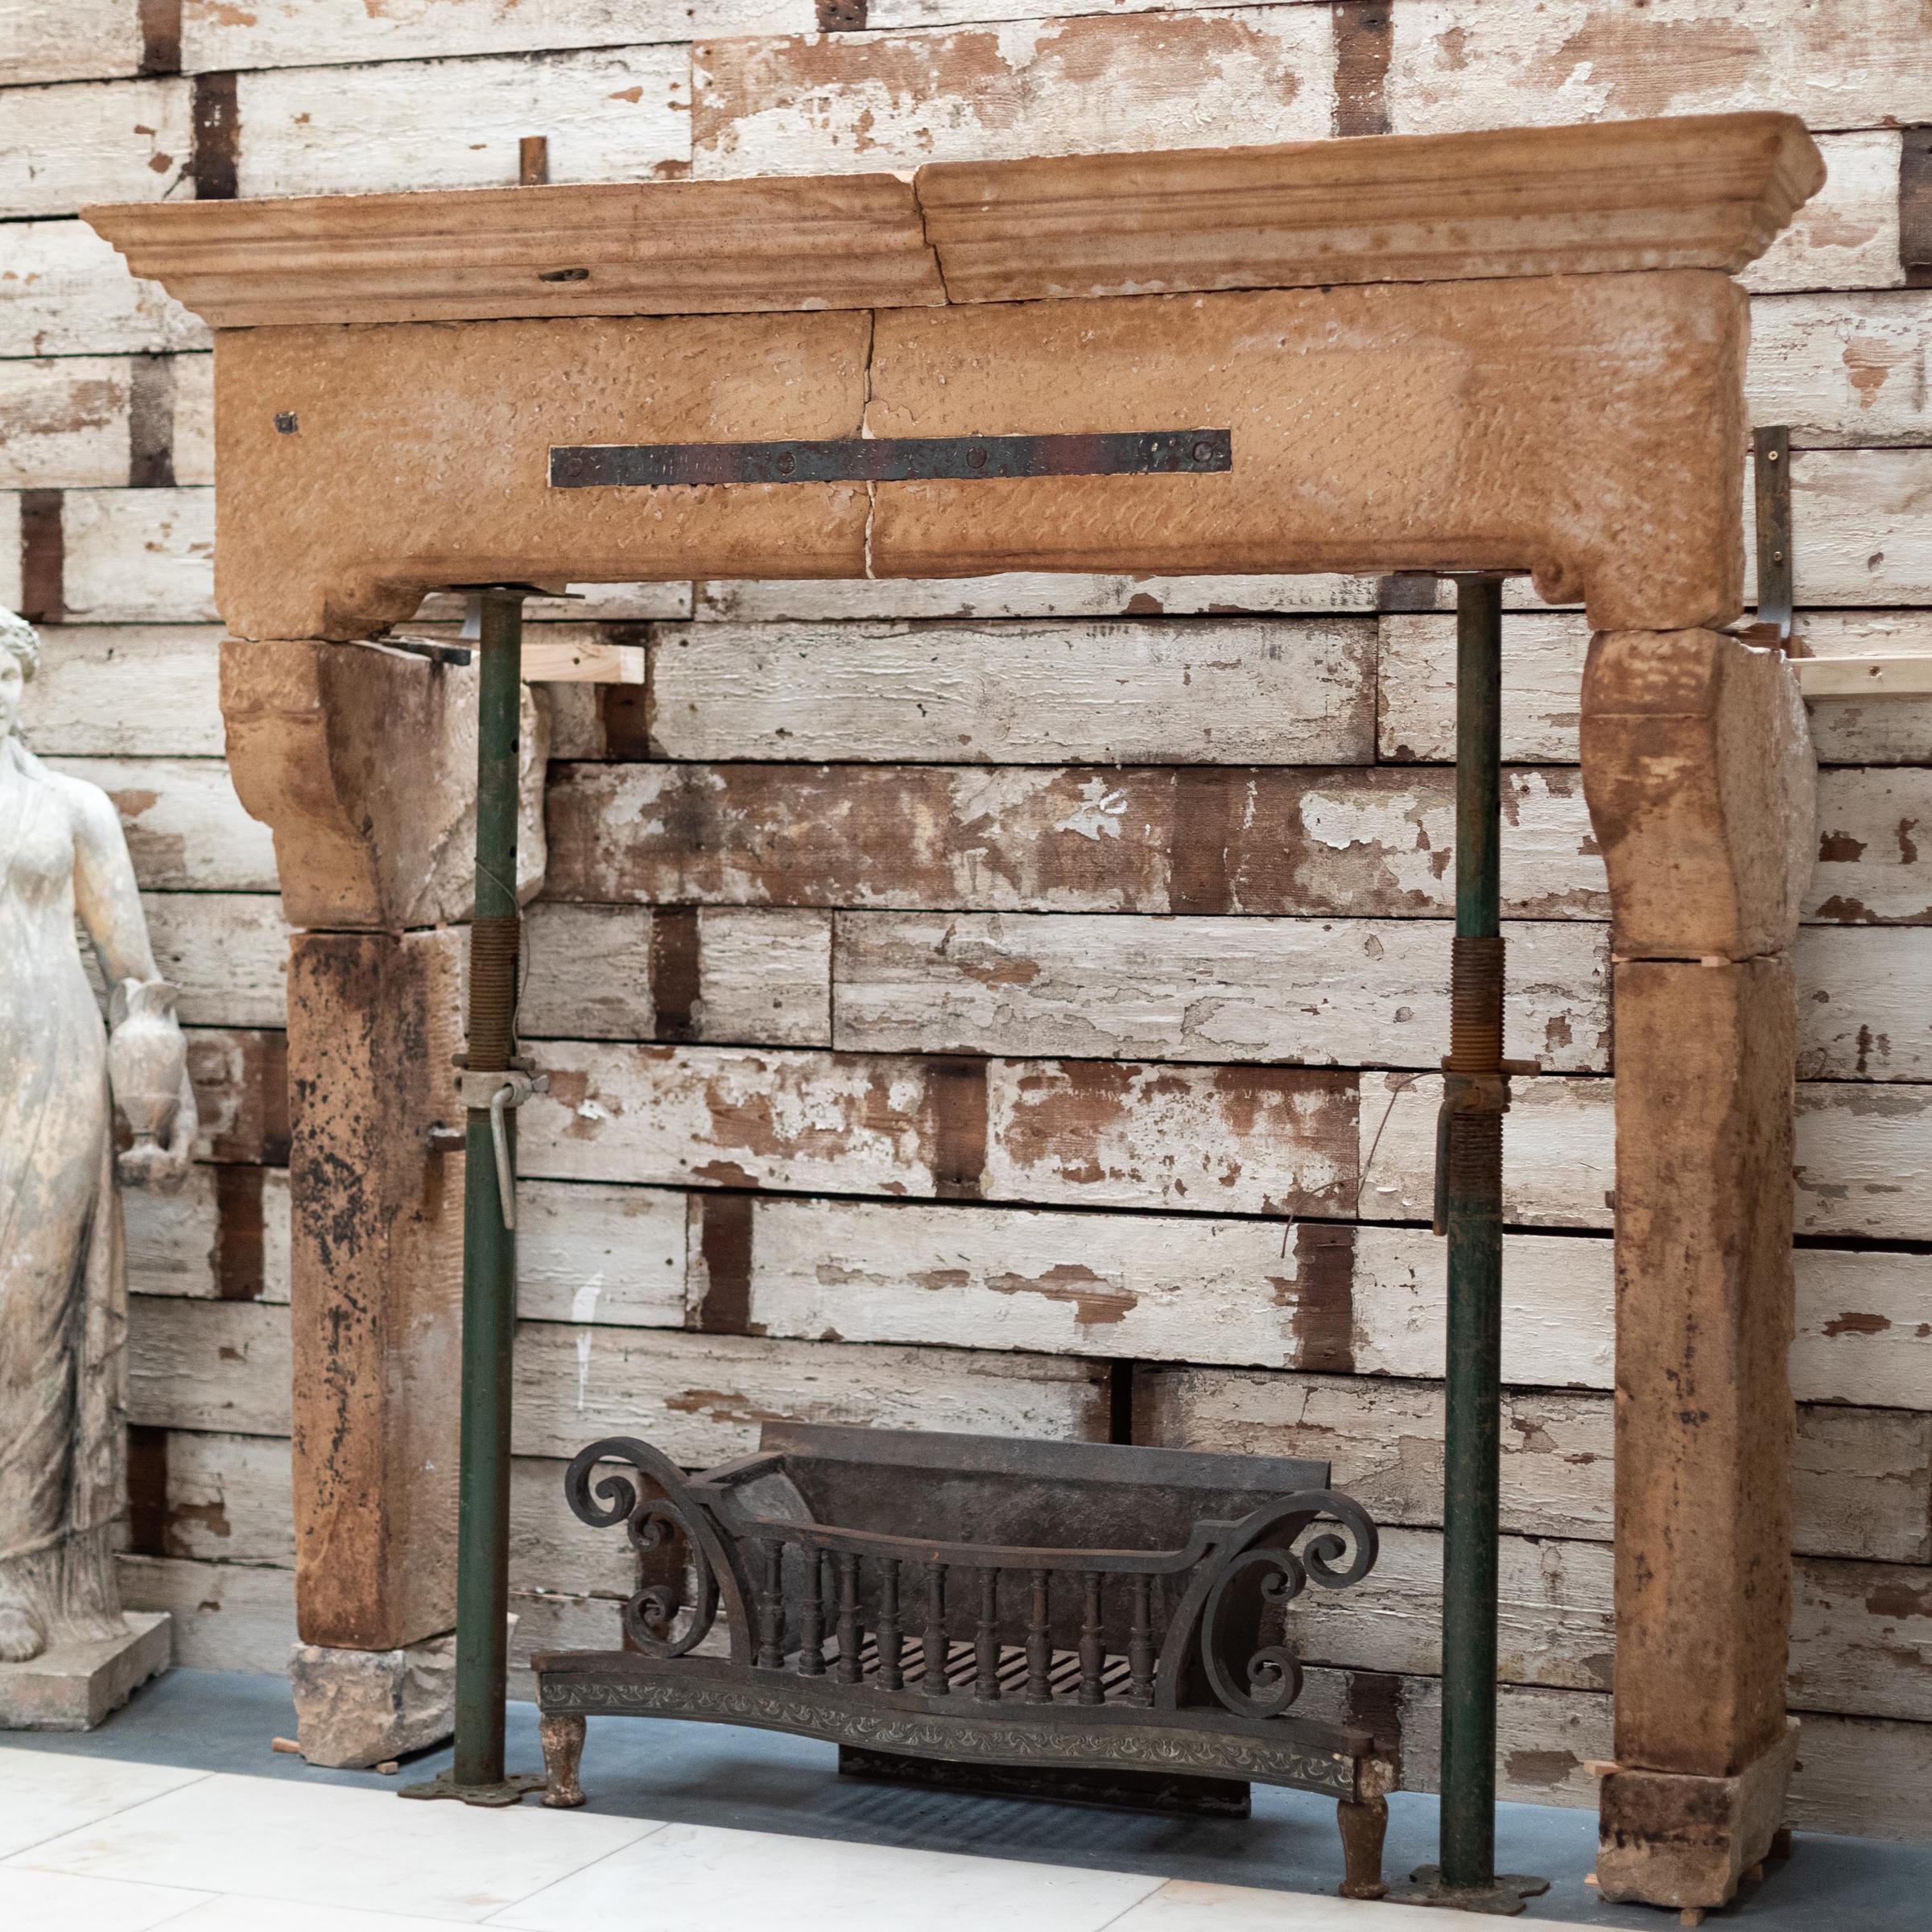 This spectacular original 18th Century fireplace surround has been intricately carved from English stone.

The imposing form and rich patina of the English stone make for a feature piece for a space matching the scale. The curved jambs that support